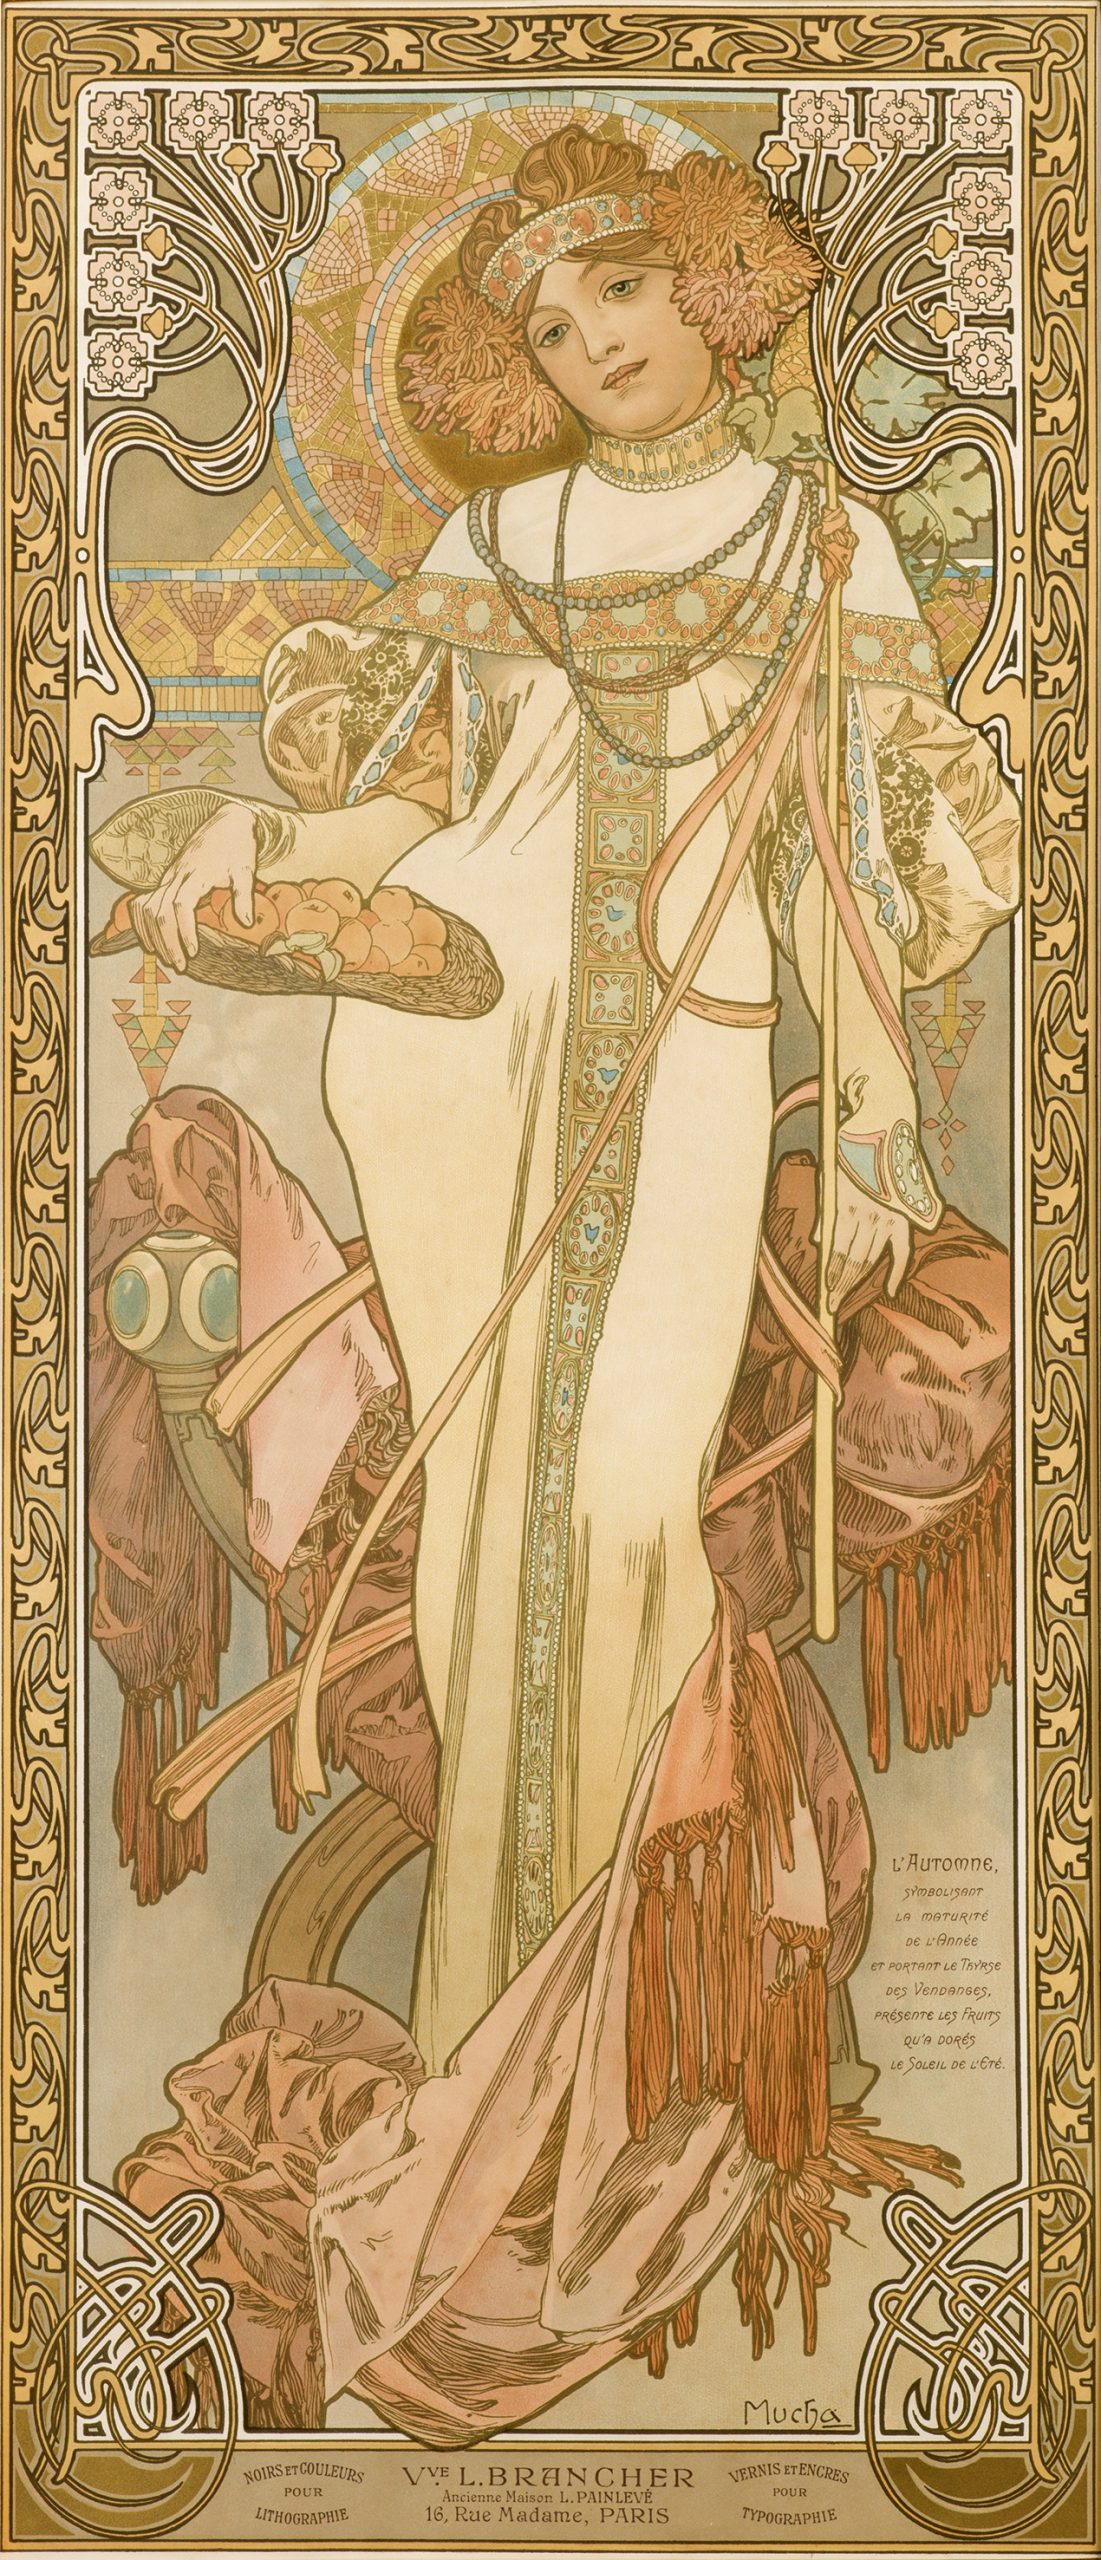 A poster of a person standing and holding a fruit basket as their jewelry matches the embroidered border.